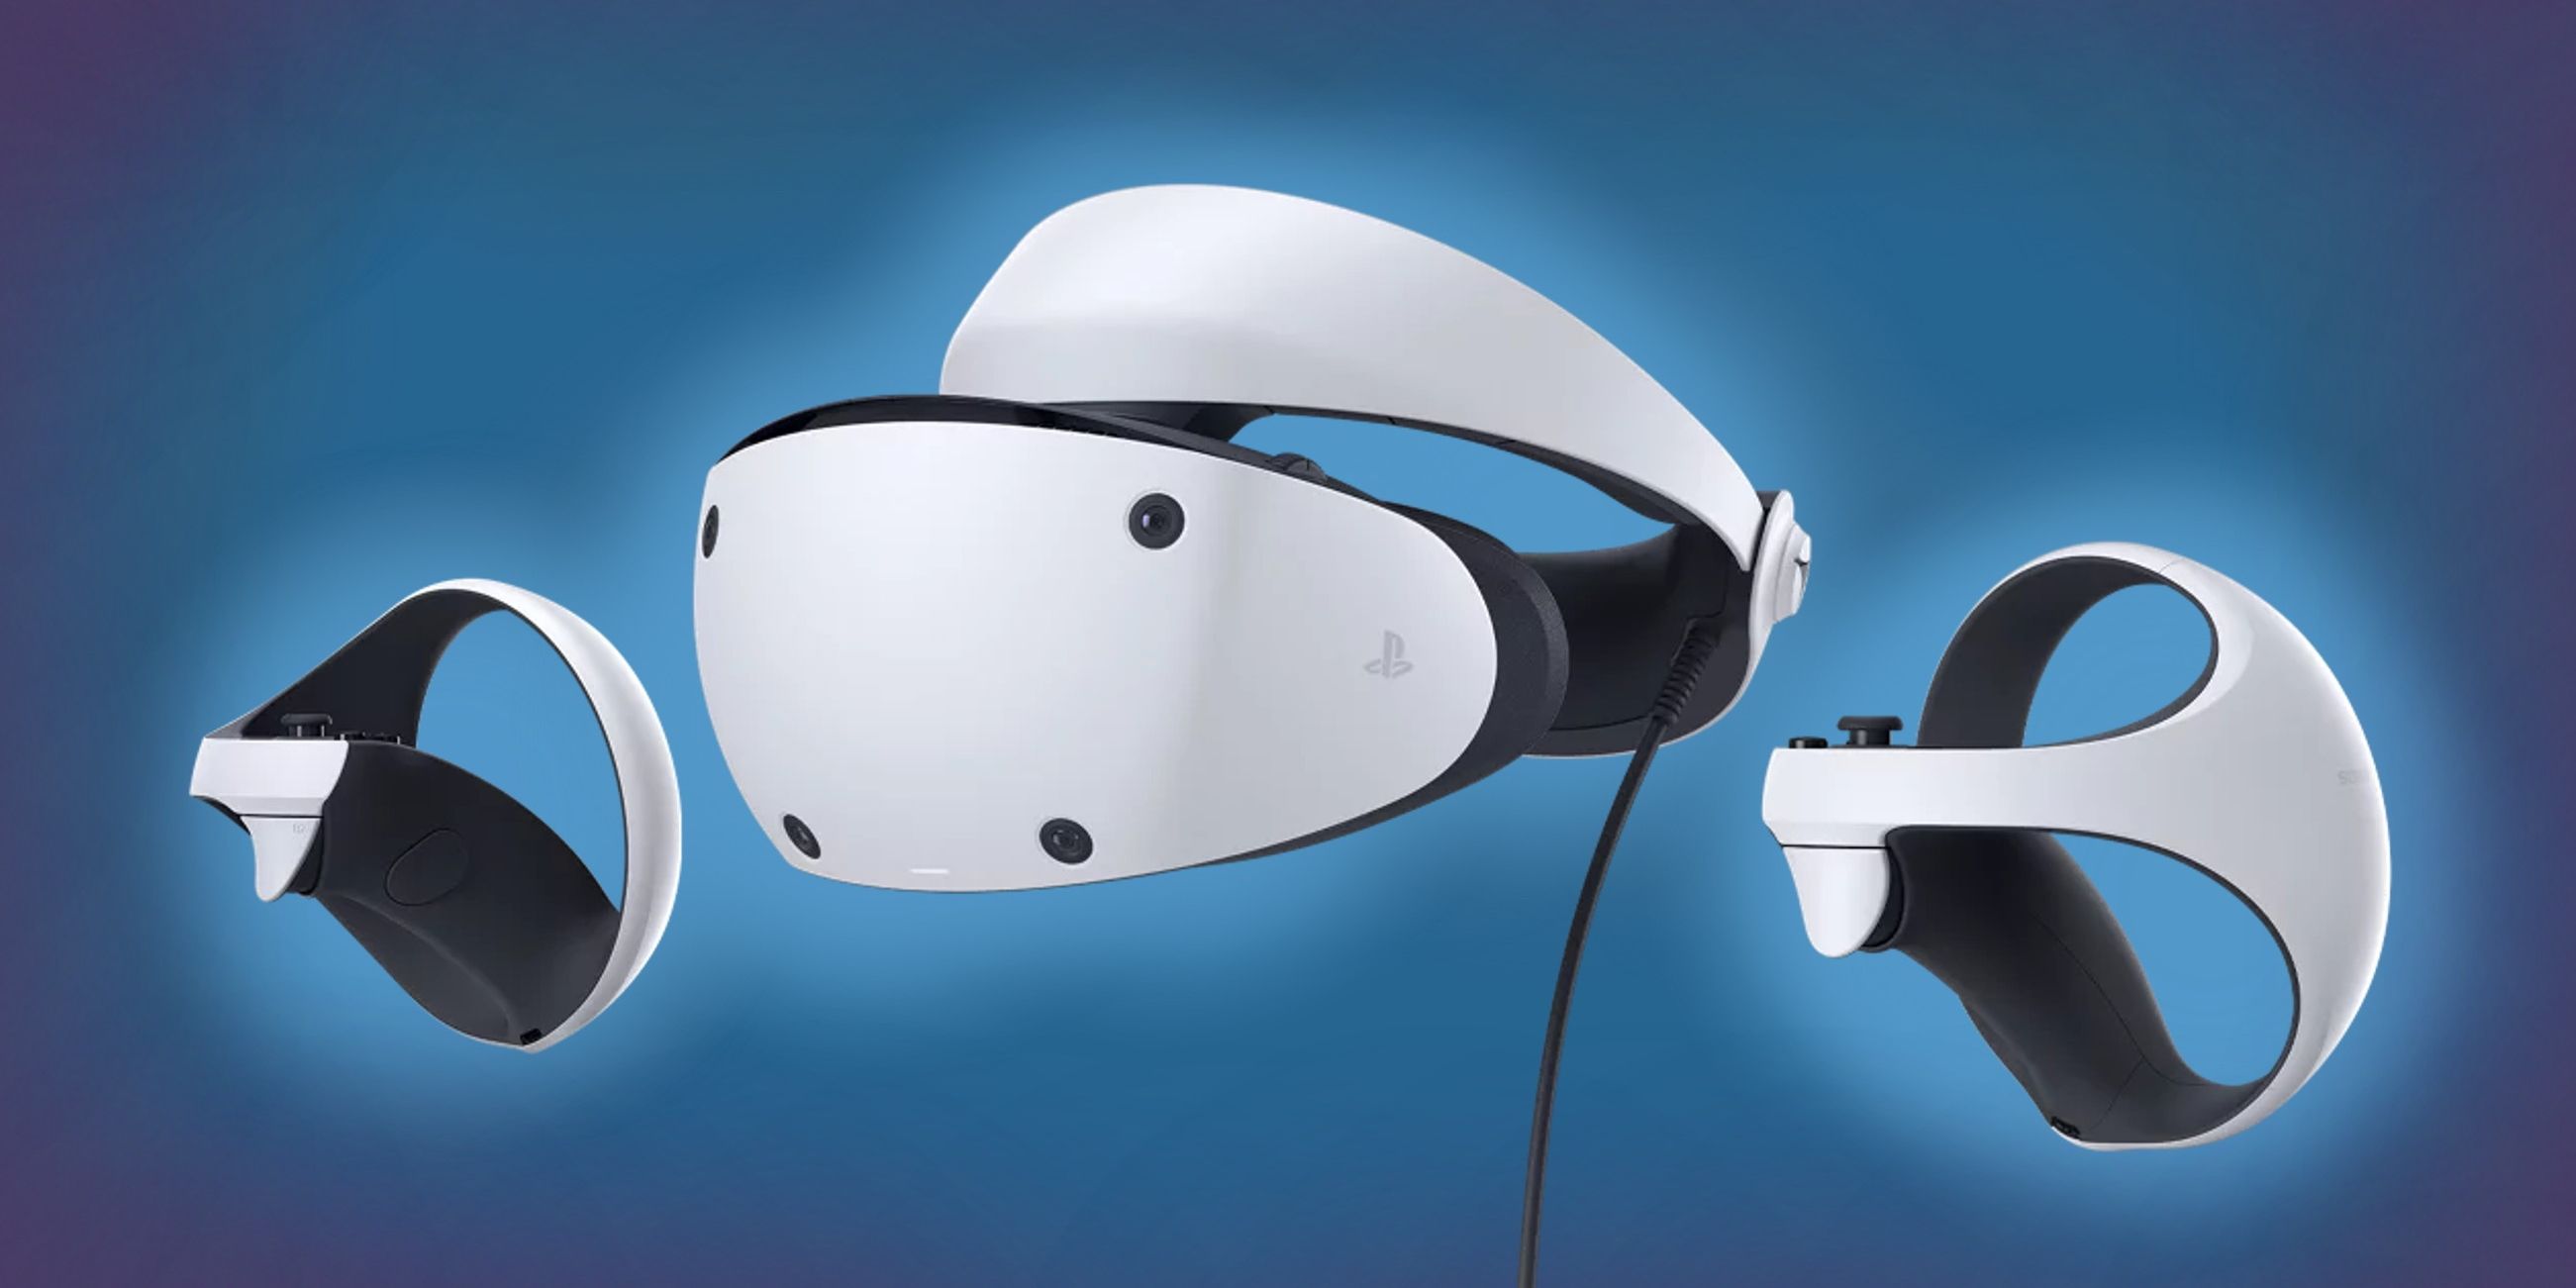 A photograph of the PlayStation VR2 headset set against a blue backdrop. The photo shows both the headset and two controllers for the VR headset.